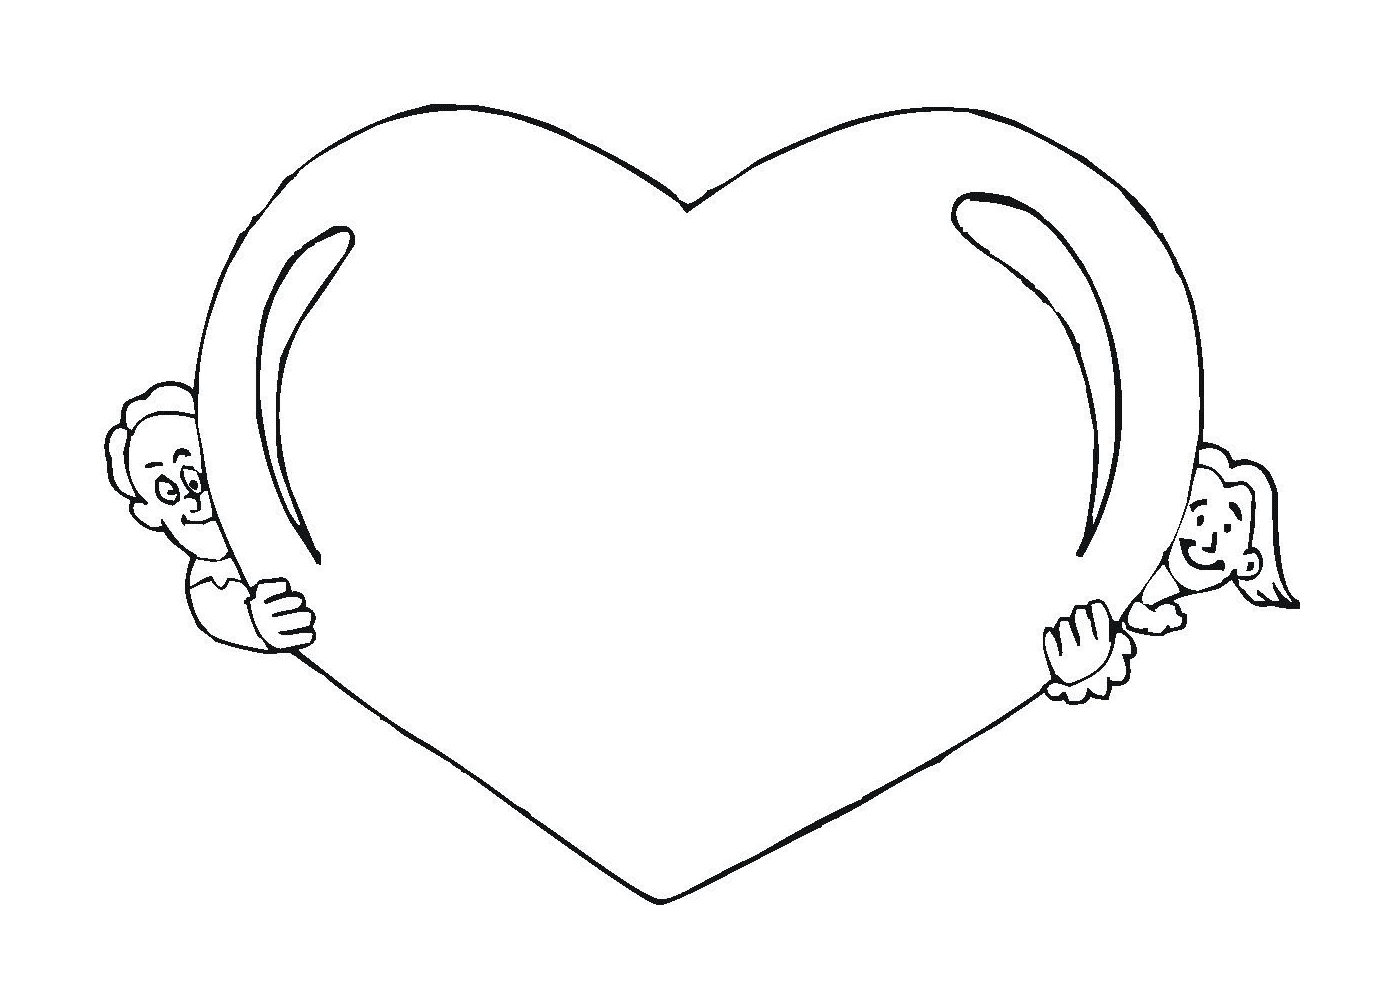  Two hands holding a heart-shaped frame 